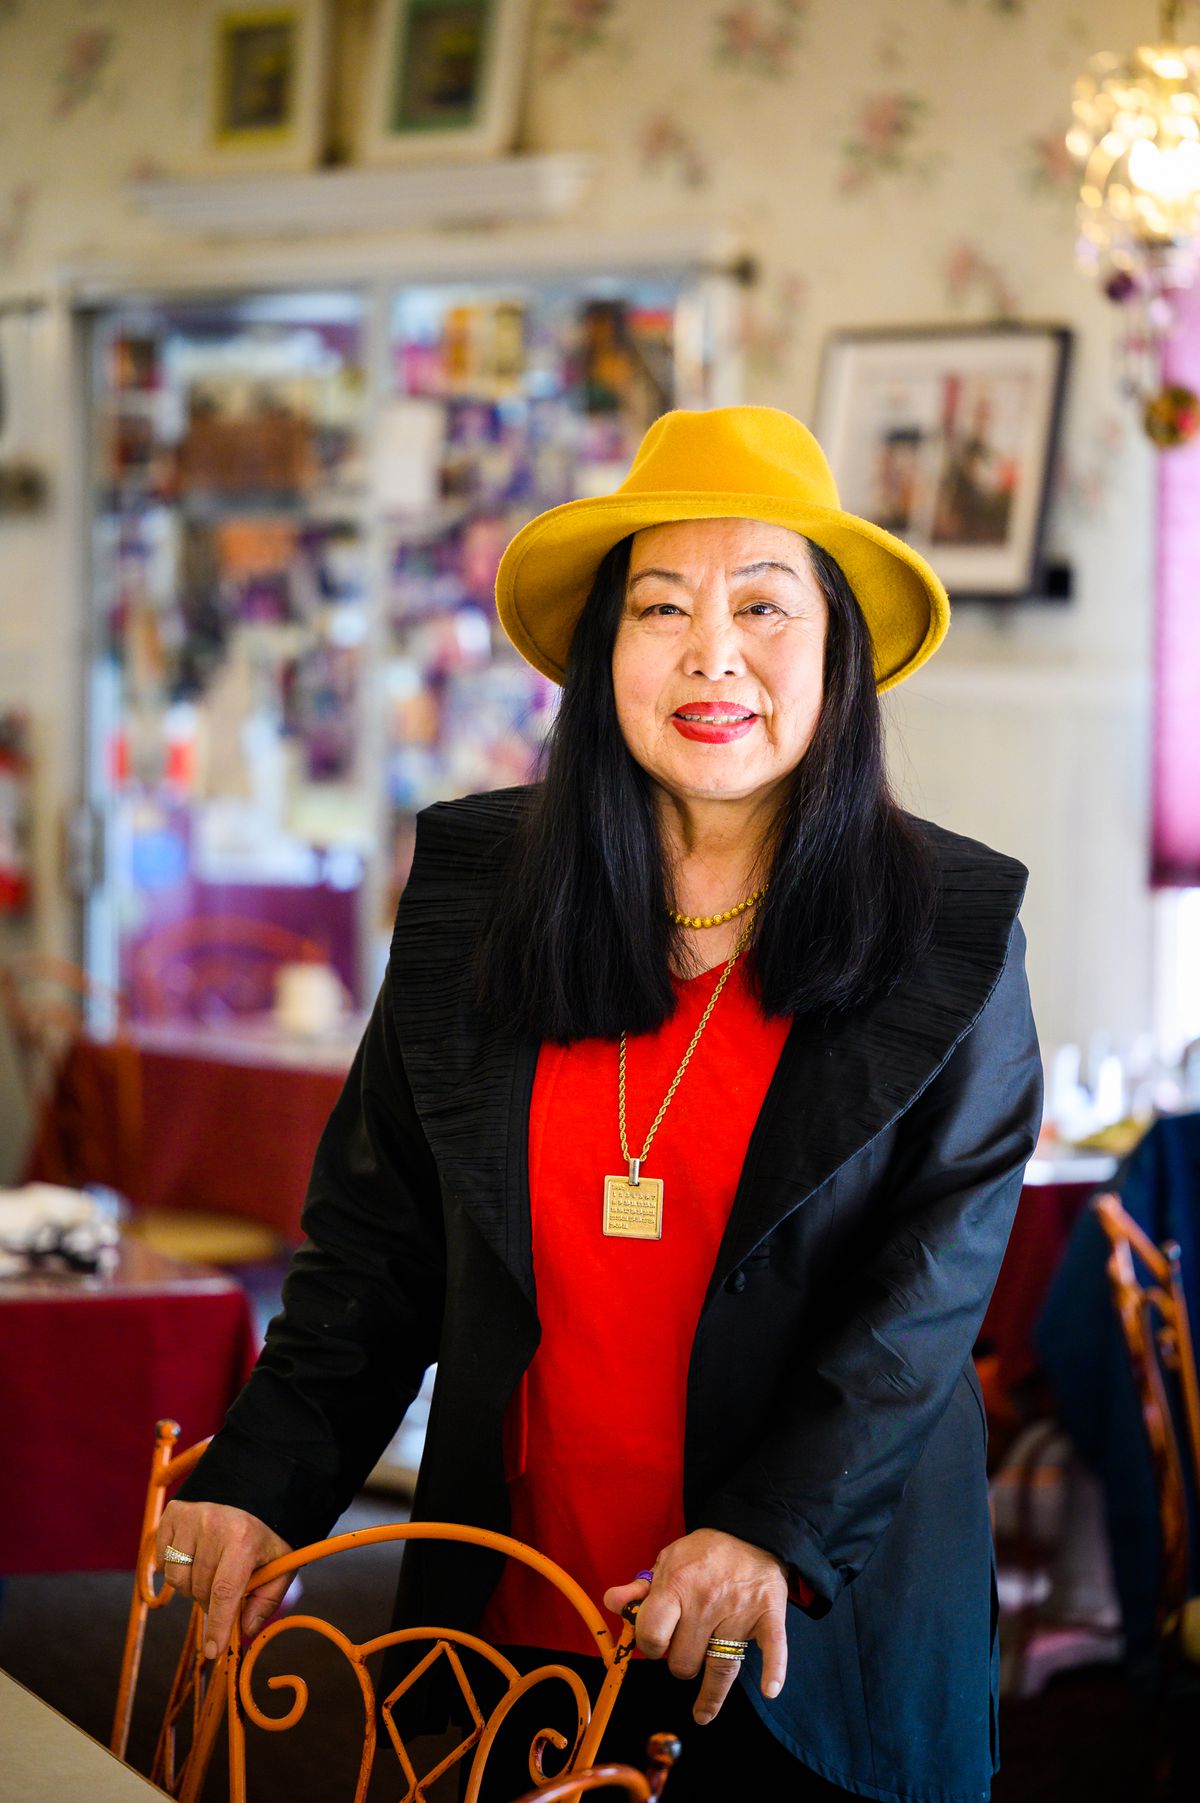 A woman in a red shirt and black jacket wearing a yellow hat.